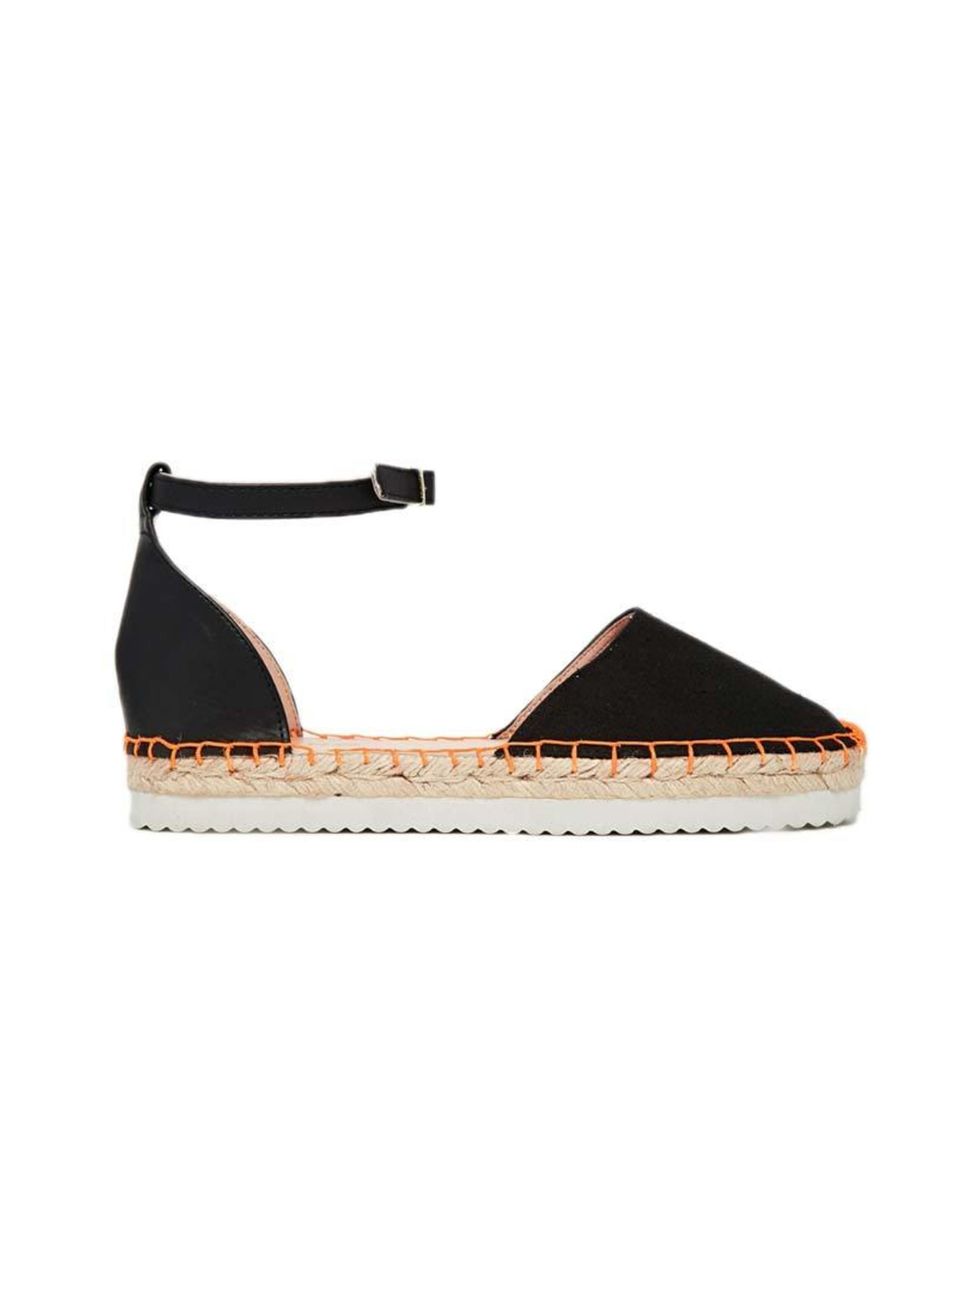 <p>A classic espadrille with a flash of neon.</p>

<p>Miss KG espadrilles, £40 at <a href="http://www.asos.com/Miss-KG/Miss-KG-Dominique-2-Part-Espadrille-Flatform-Shoes/Prod/pgeproduct.aspx?iid=4871304&cid=6992&sh=0&pge=1&pgesize=204&sort=-1&clr=Black&to